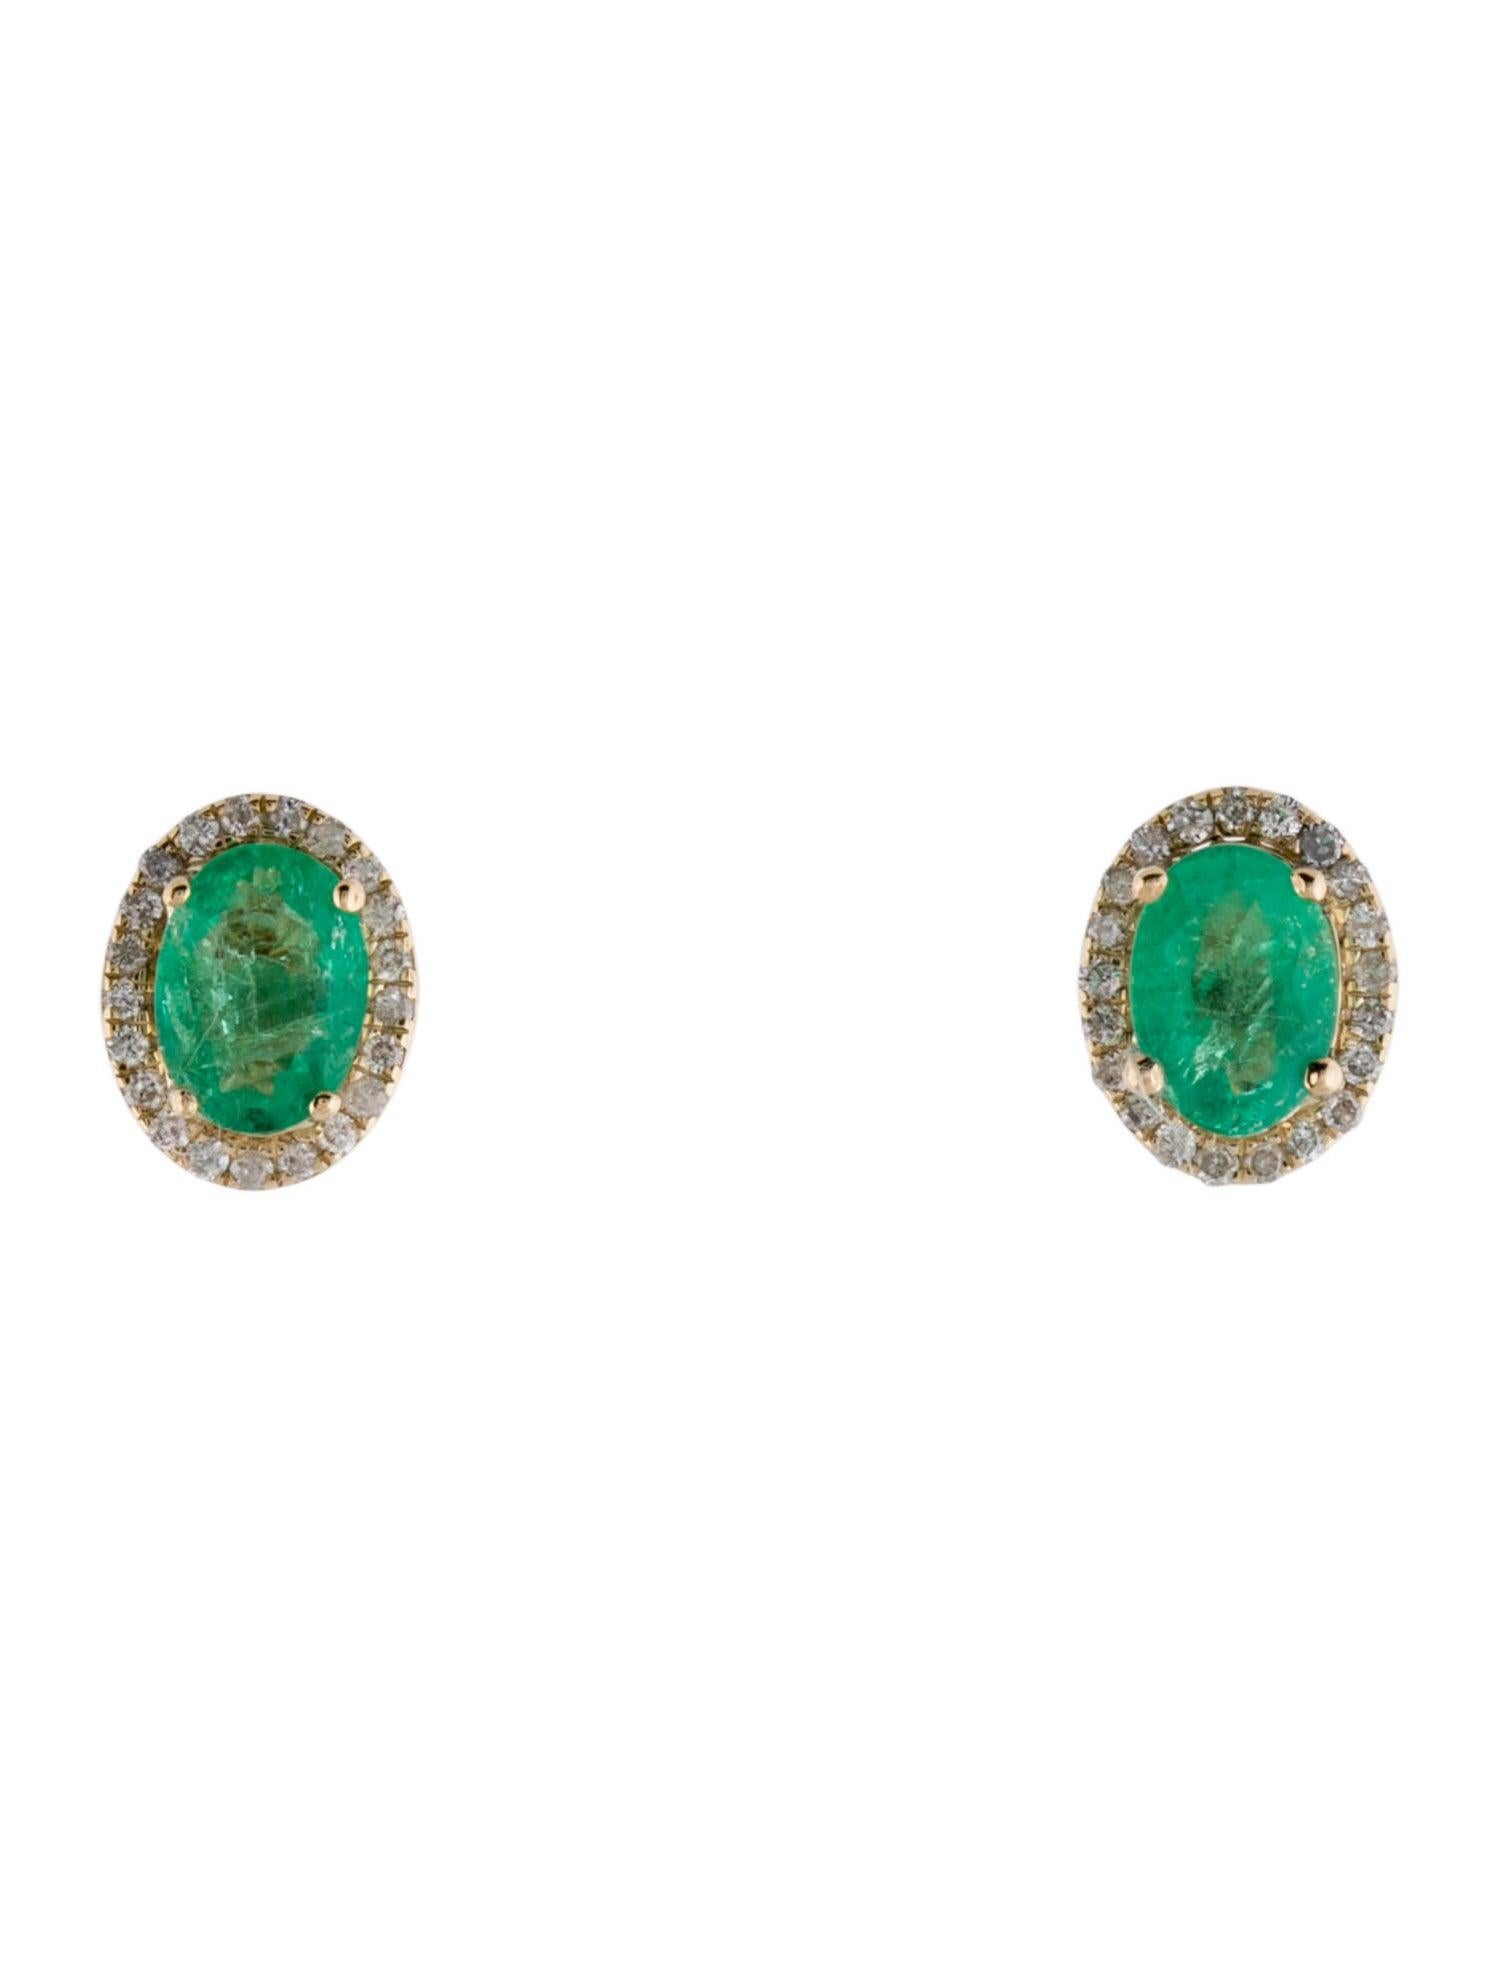 Chic 14K 1.56ctw Emerald & Diamond Studs - Elegant Gemstone Earrings In New Condition For Sale In Holtsville, NY